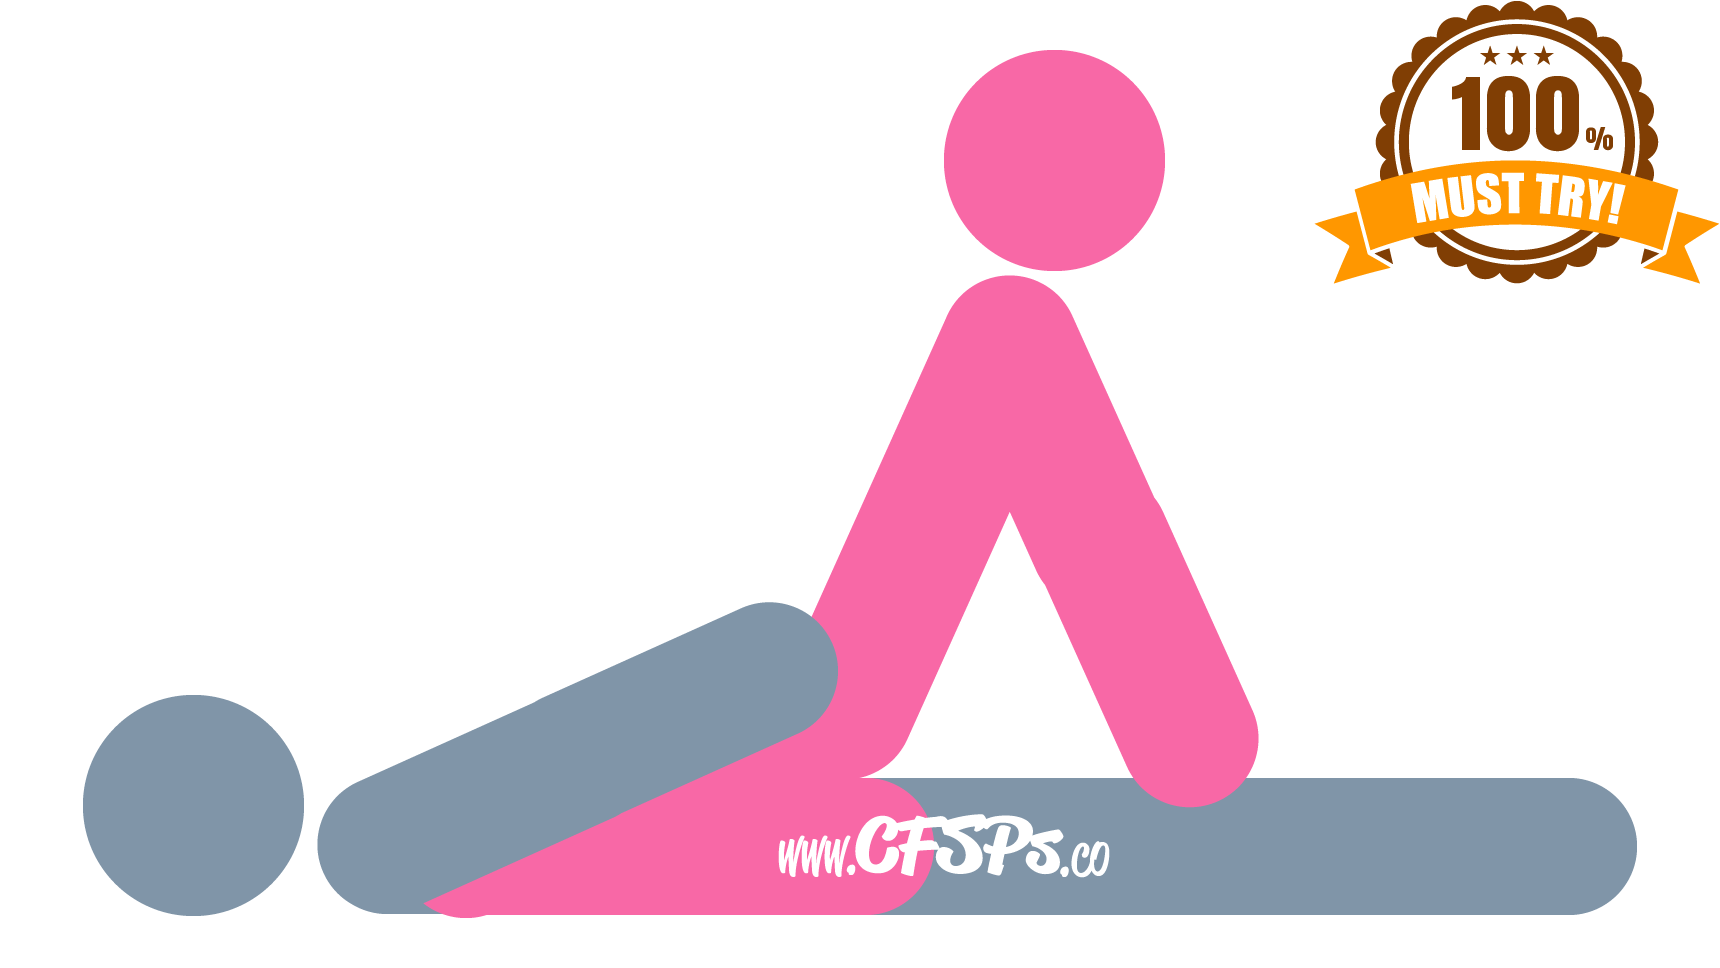 This stick figure image depicts a man and woman having sex in the Clip sex position. The man is lying on his back with his legs together. The woman is straddling his pelvis with her knees near his shoulders, and she's supporting her upper body with her hands on his thighs behind her.